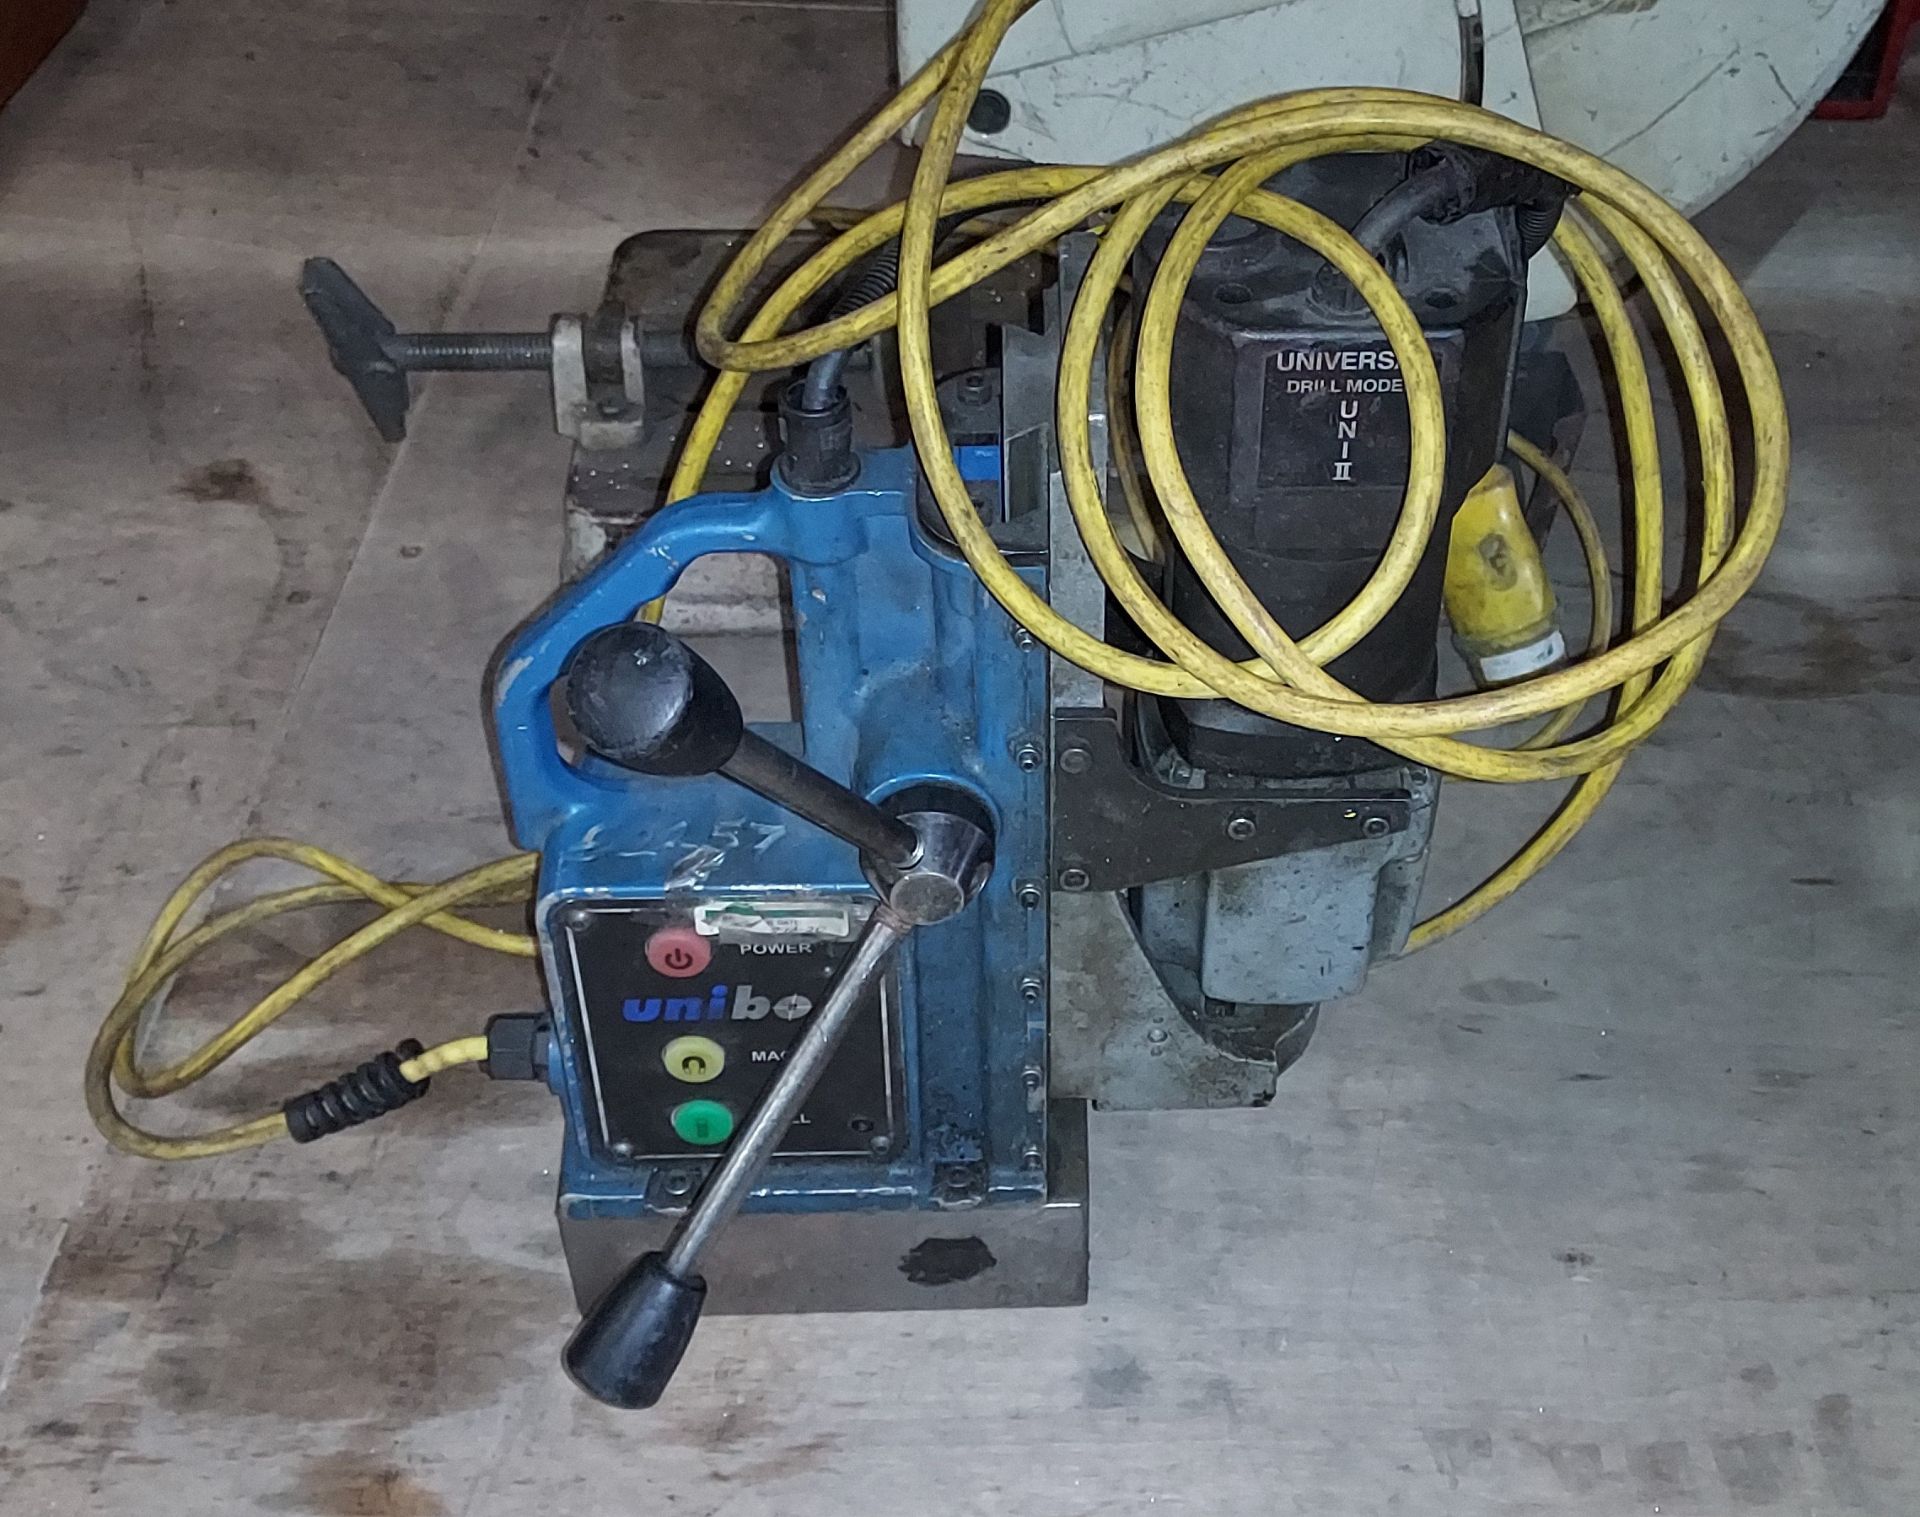 1 X UNIBOR EQ50 MAGNETIC DRILLING MACHINE - WITH A 3 PIN PLUG